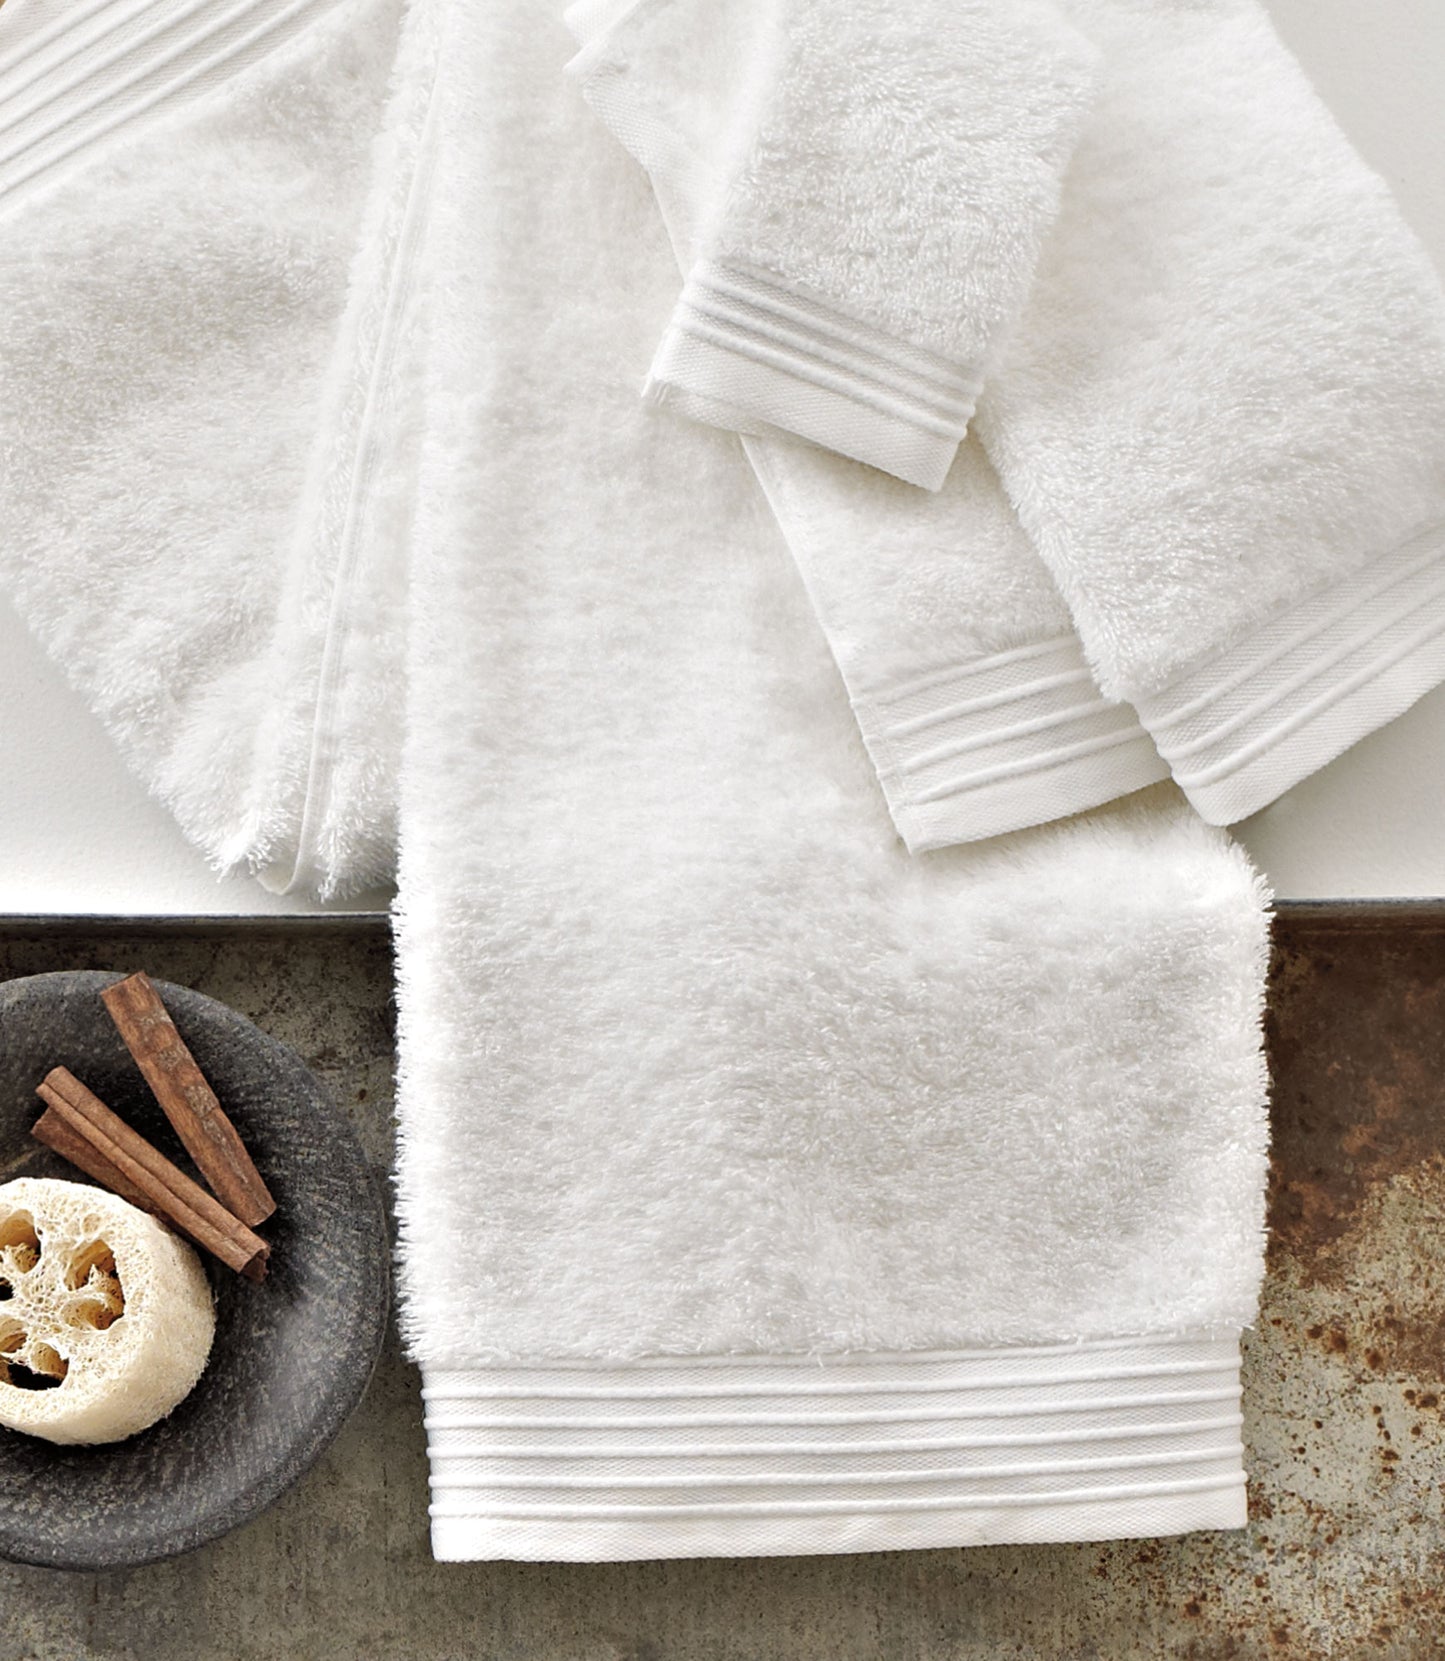 Bamboo Collection Luxury Bath Towel Set In Bronze Copper - Bath